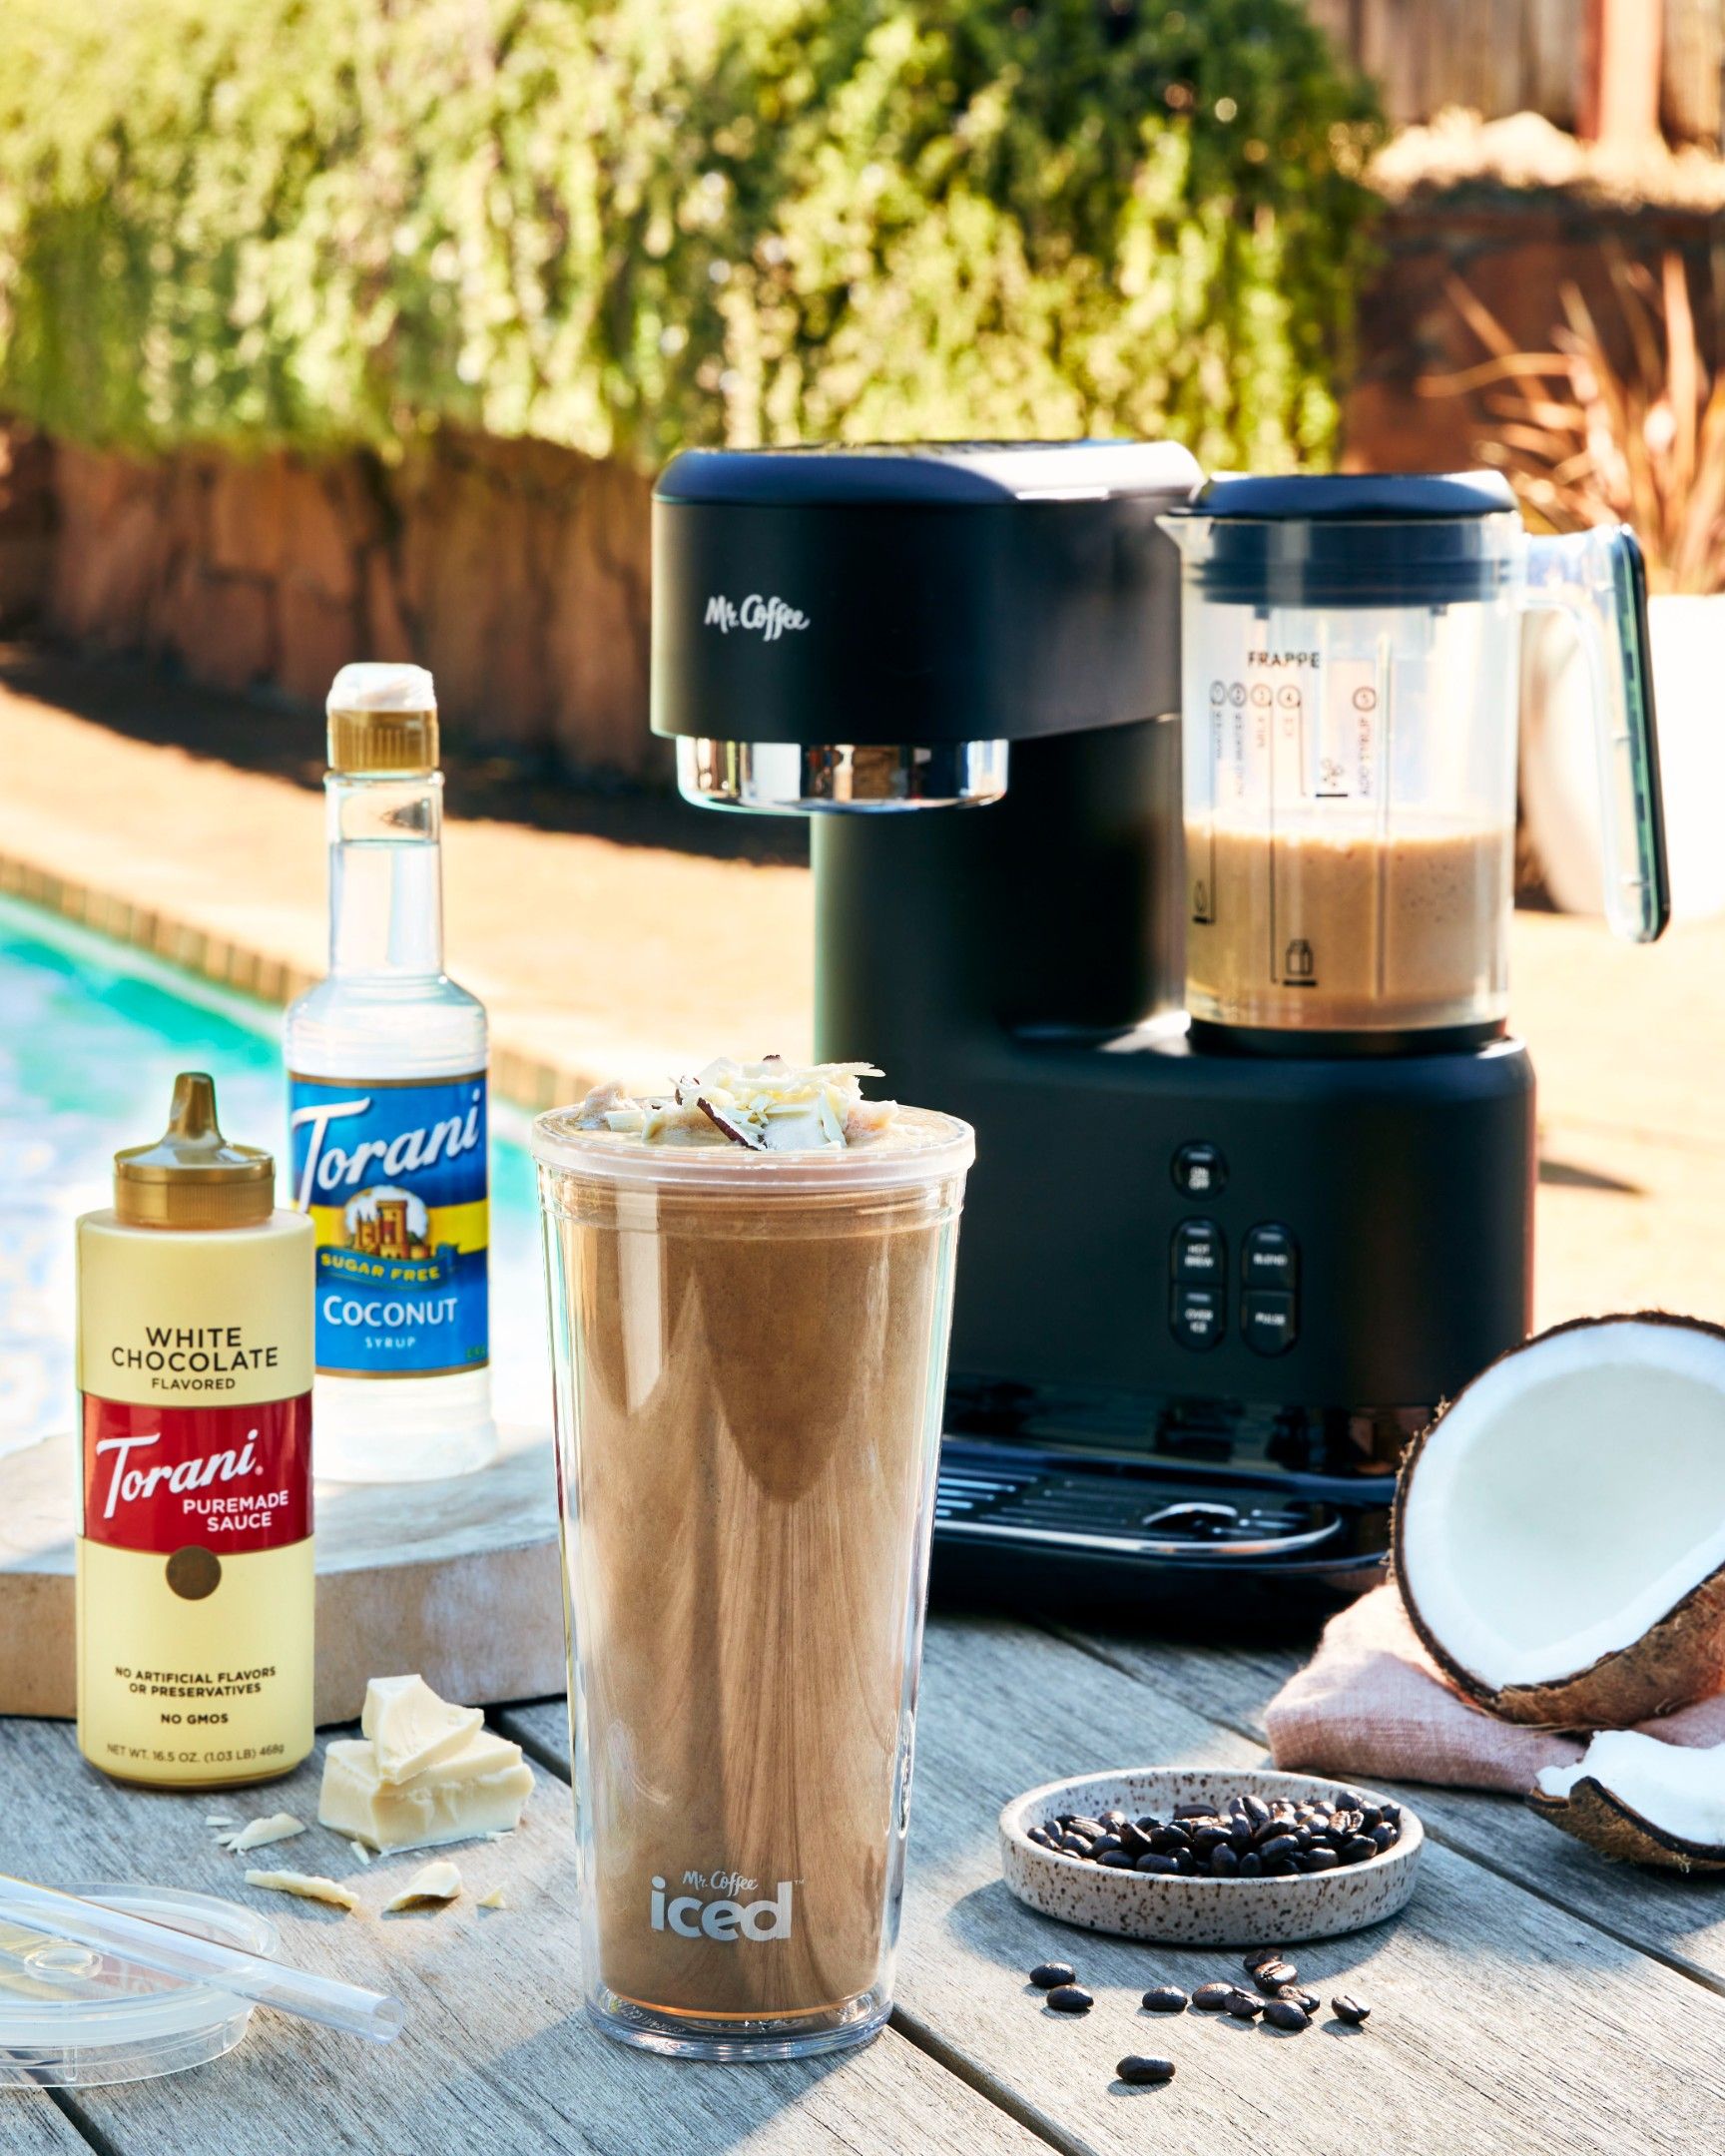 How to make a Frappe with the Mr. Coffee Iced and Hot Single Serve